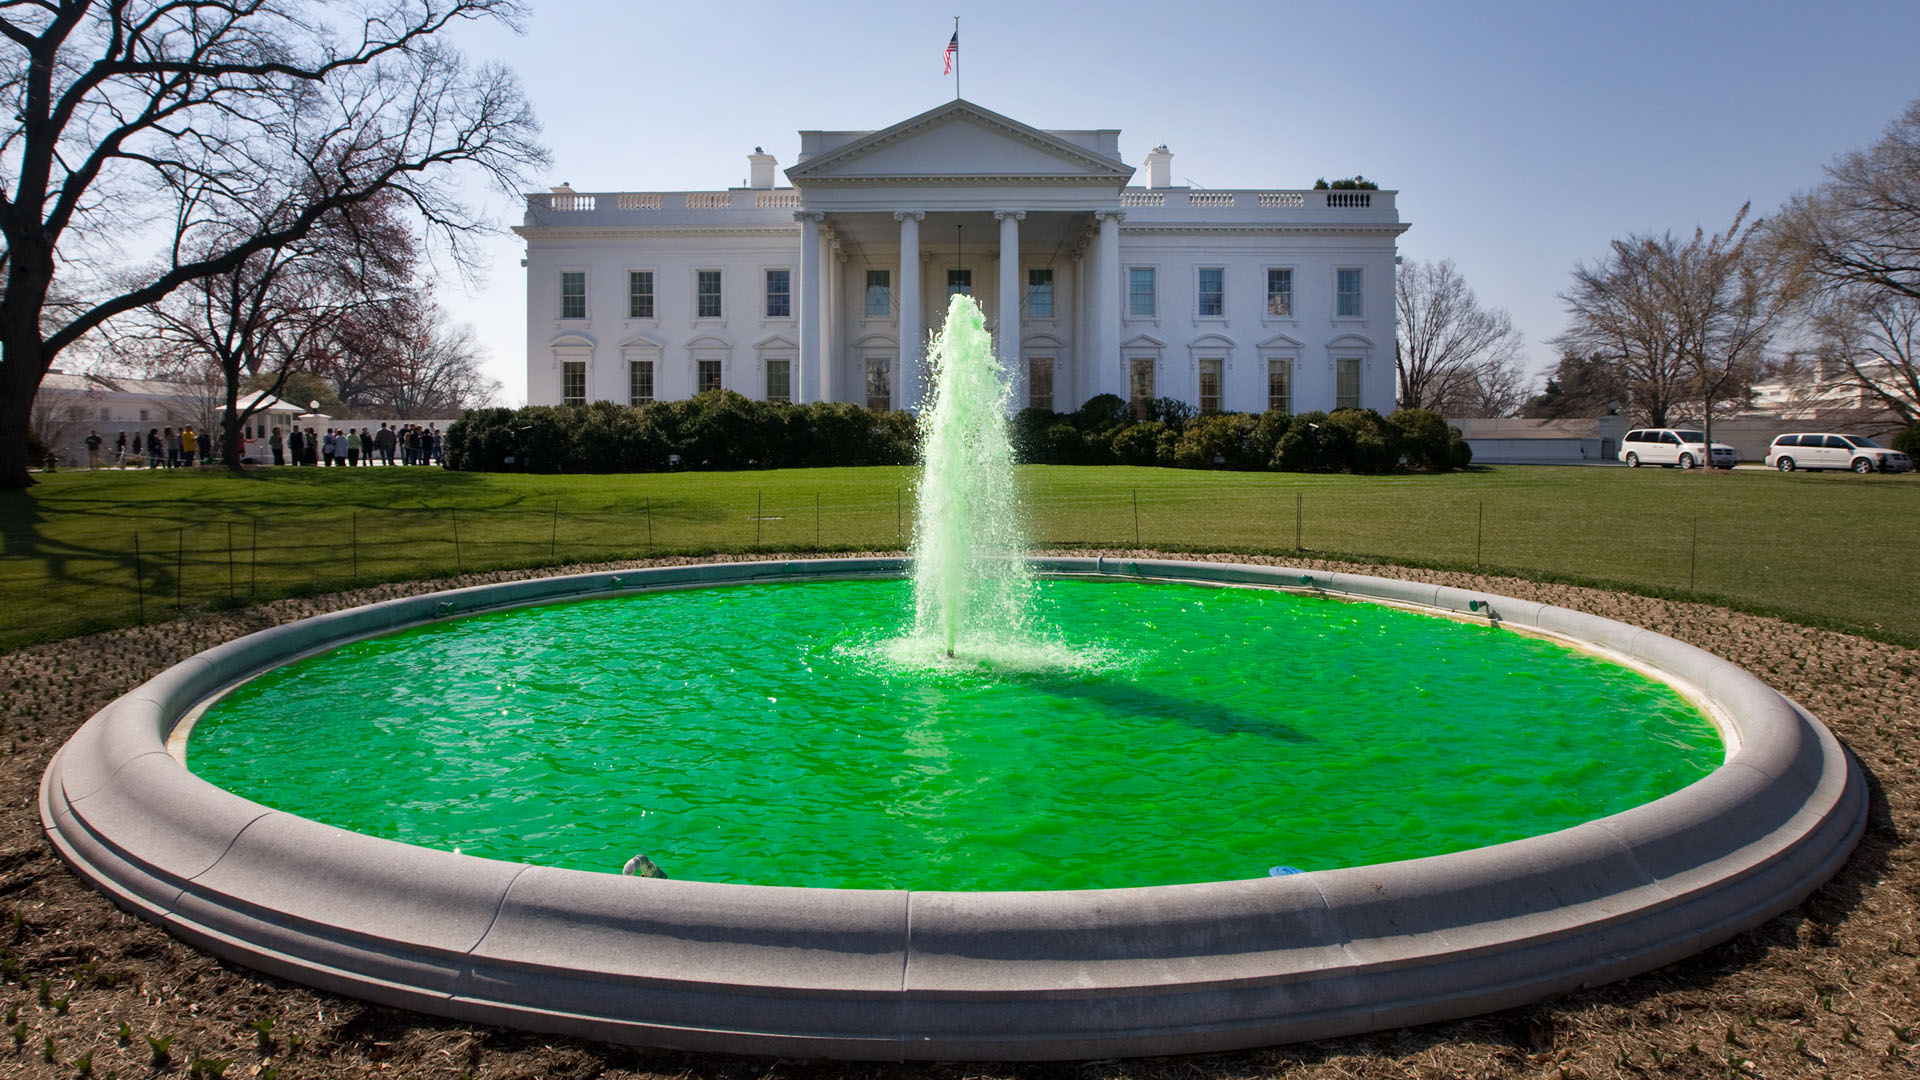 The Water in the Fountain on the North Lawn of the White House is Dyed Green in Honor of St. Patrick's Day